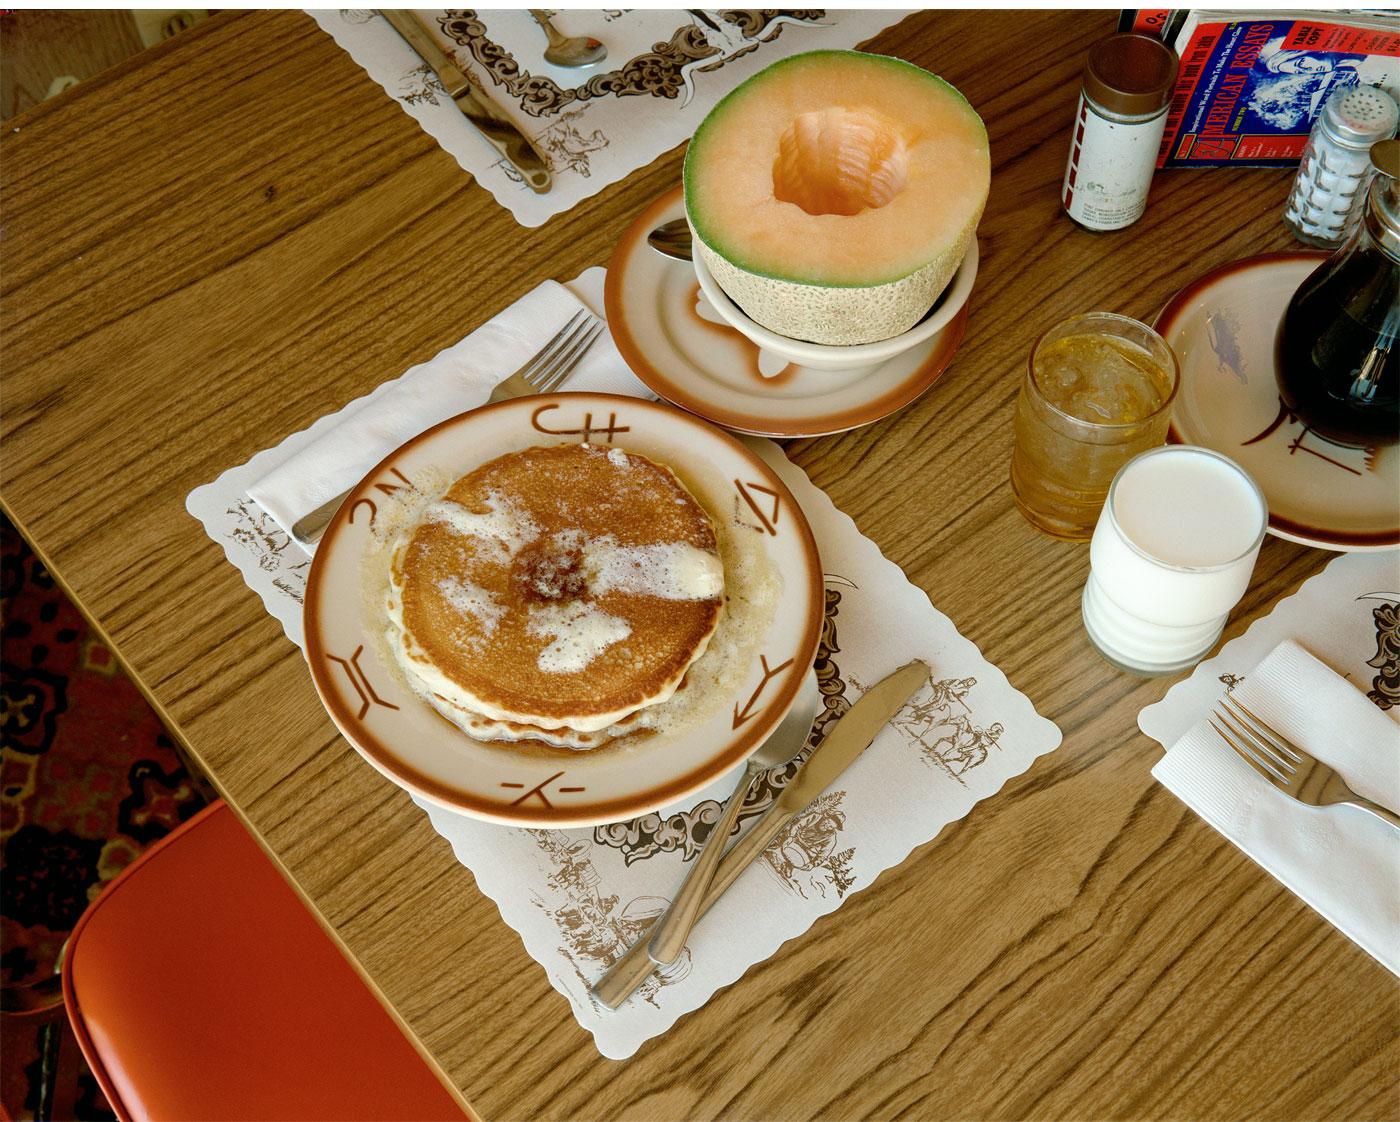 Pancakes by Stephen Shore